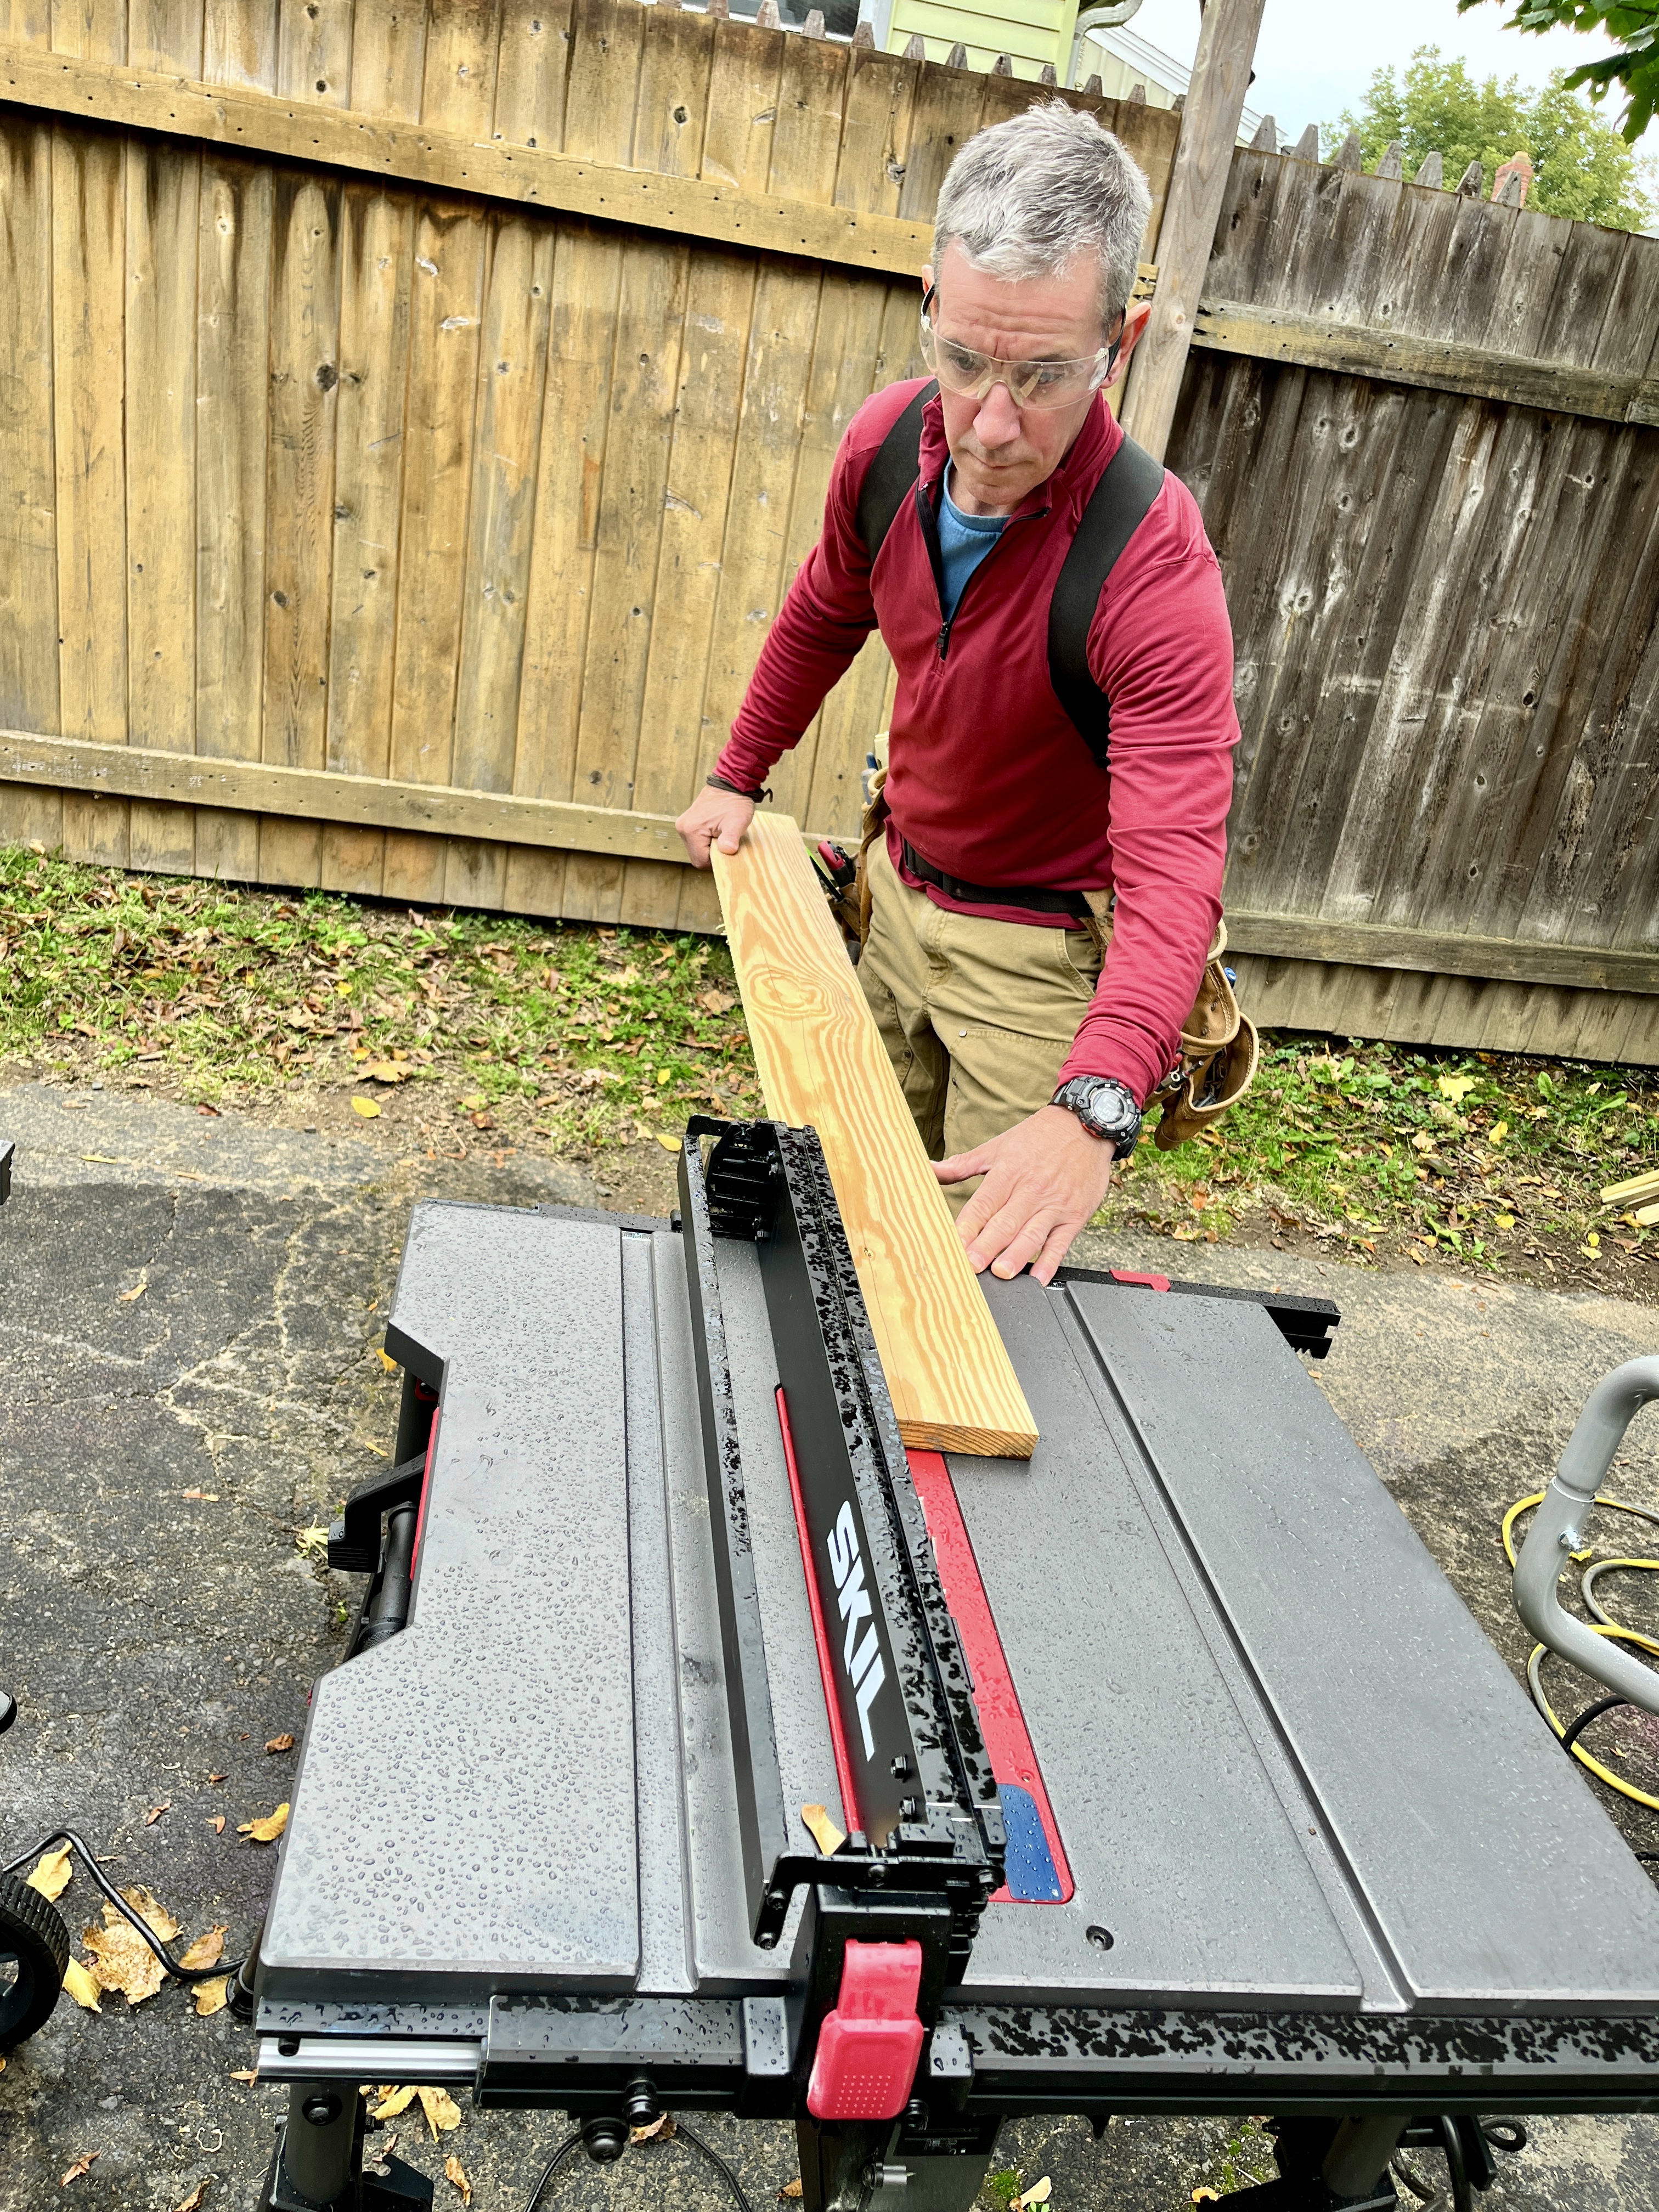 BobVila.com tester Mark Clement rips a board on a Skil portable table saw.